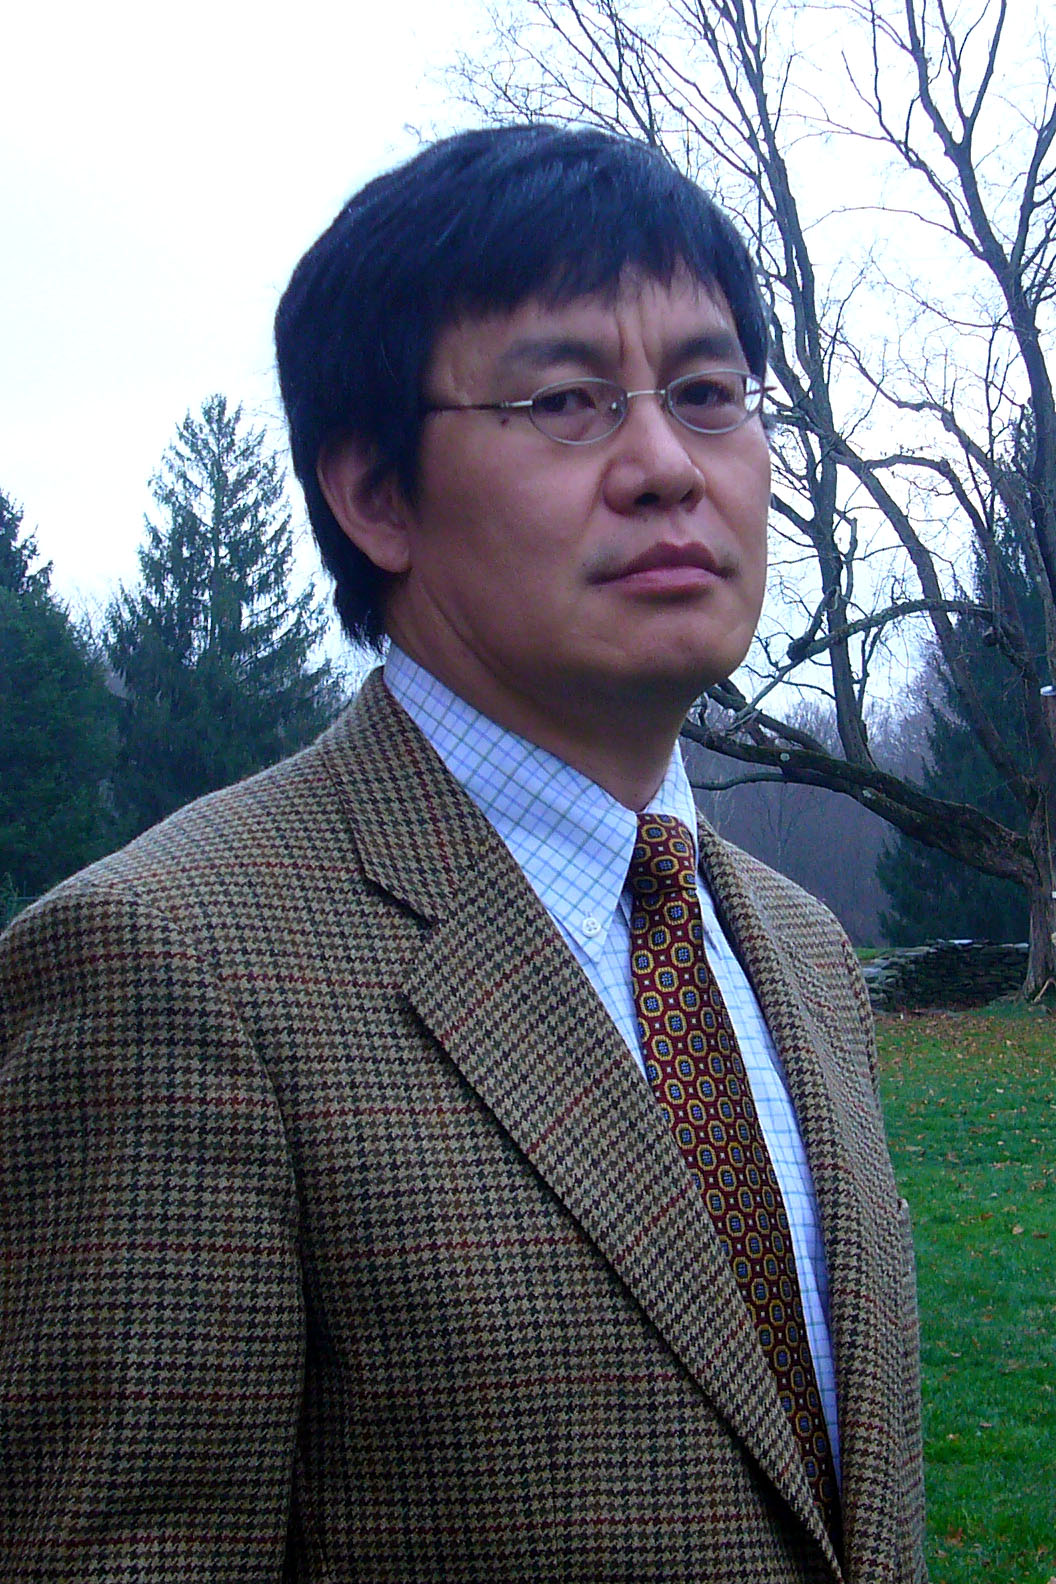 Pictured: Haoming Liu - Man with a suit and glasses standing outside with grass and trees in the background.